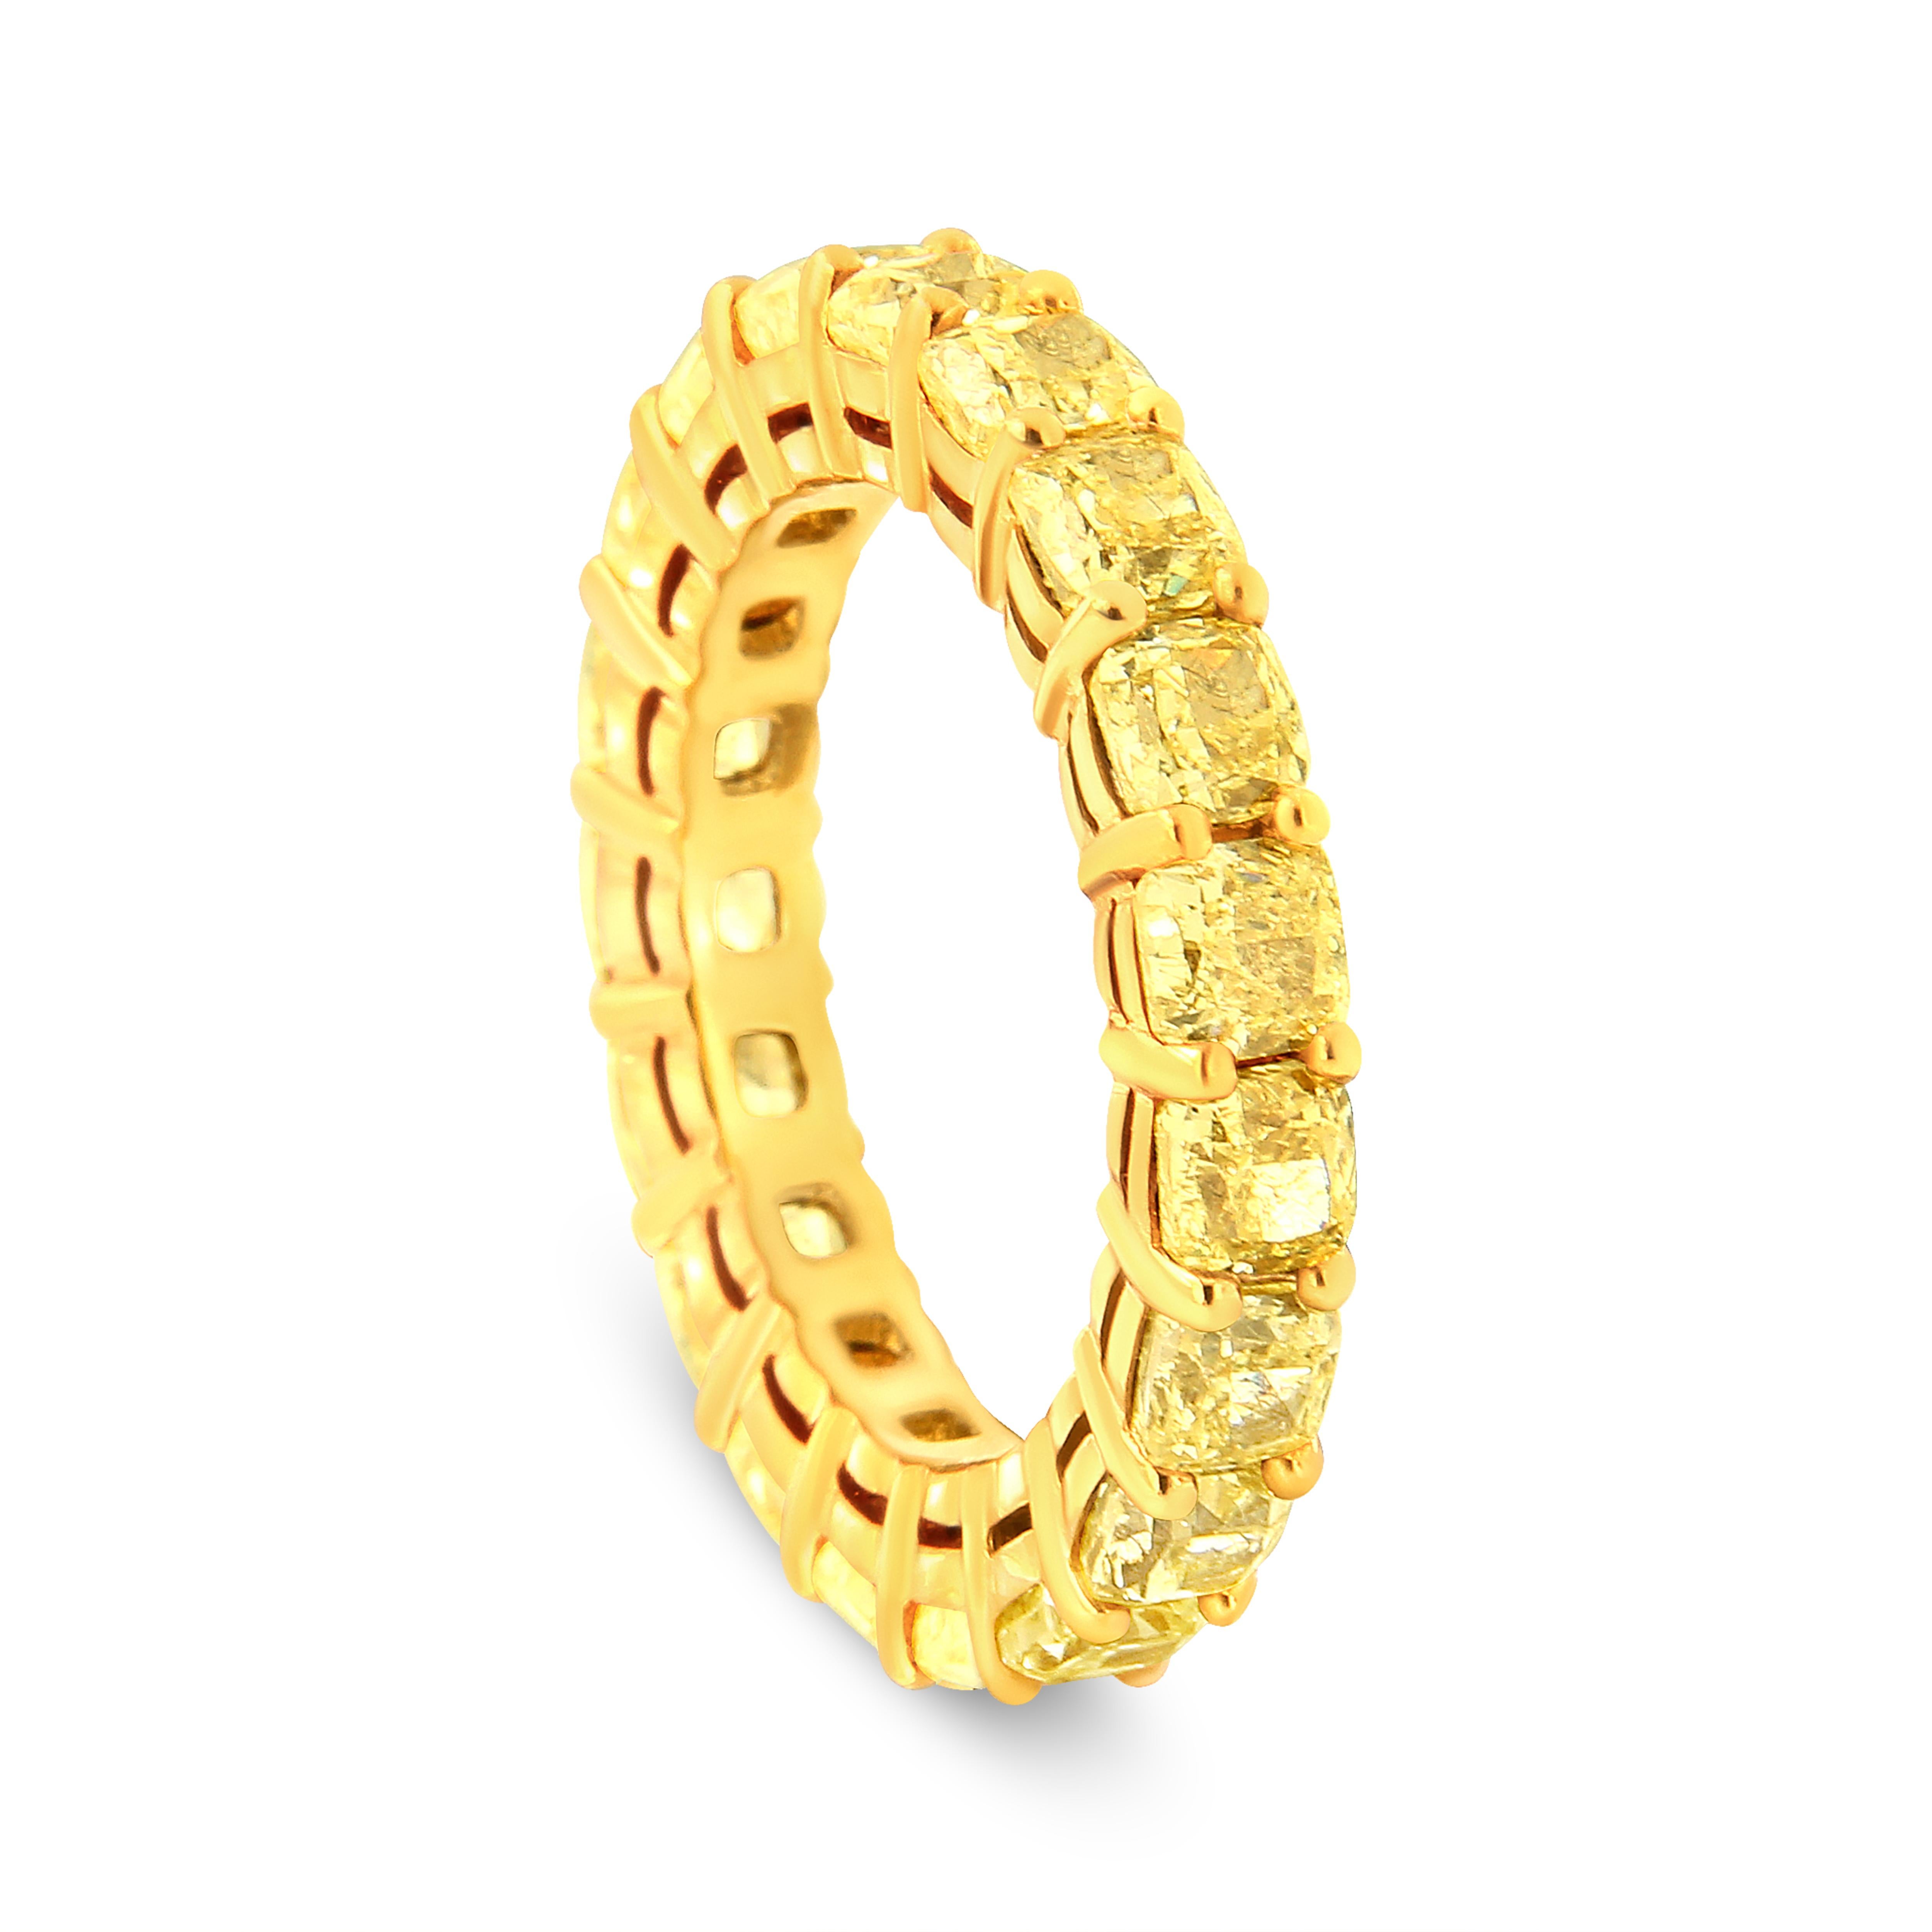 This band is crafted from 18-karat yellow gold and has a stunning 5.0 cttw of natural, yellow cushion diamonds. This magnificent diamond eternity band features beautifully matched 19 cushion cut yellow diamonds in a shared prong setting. The total